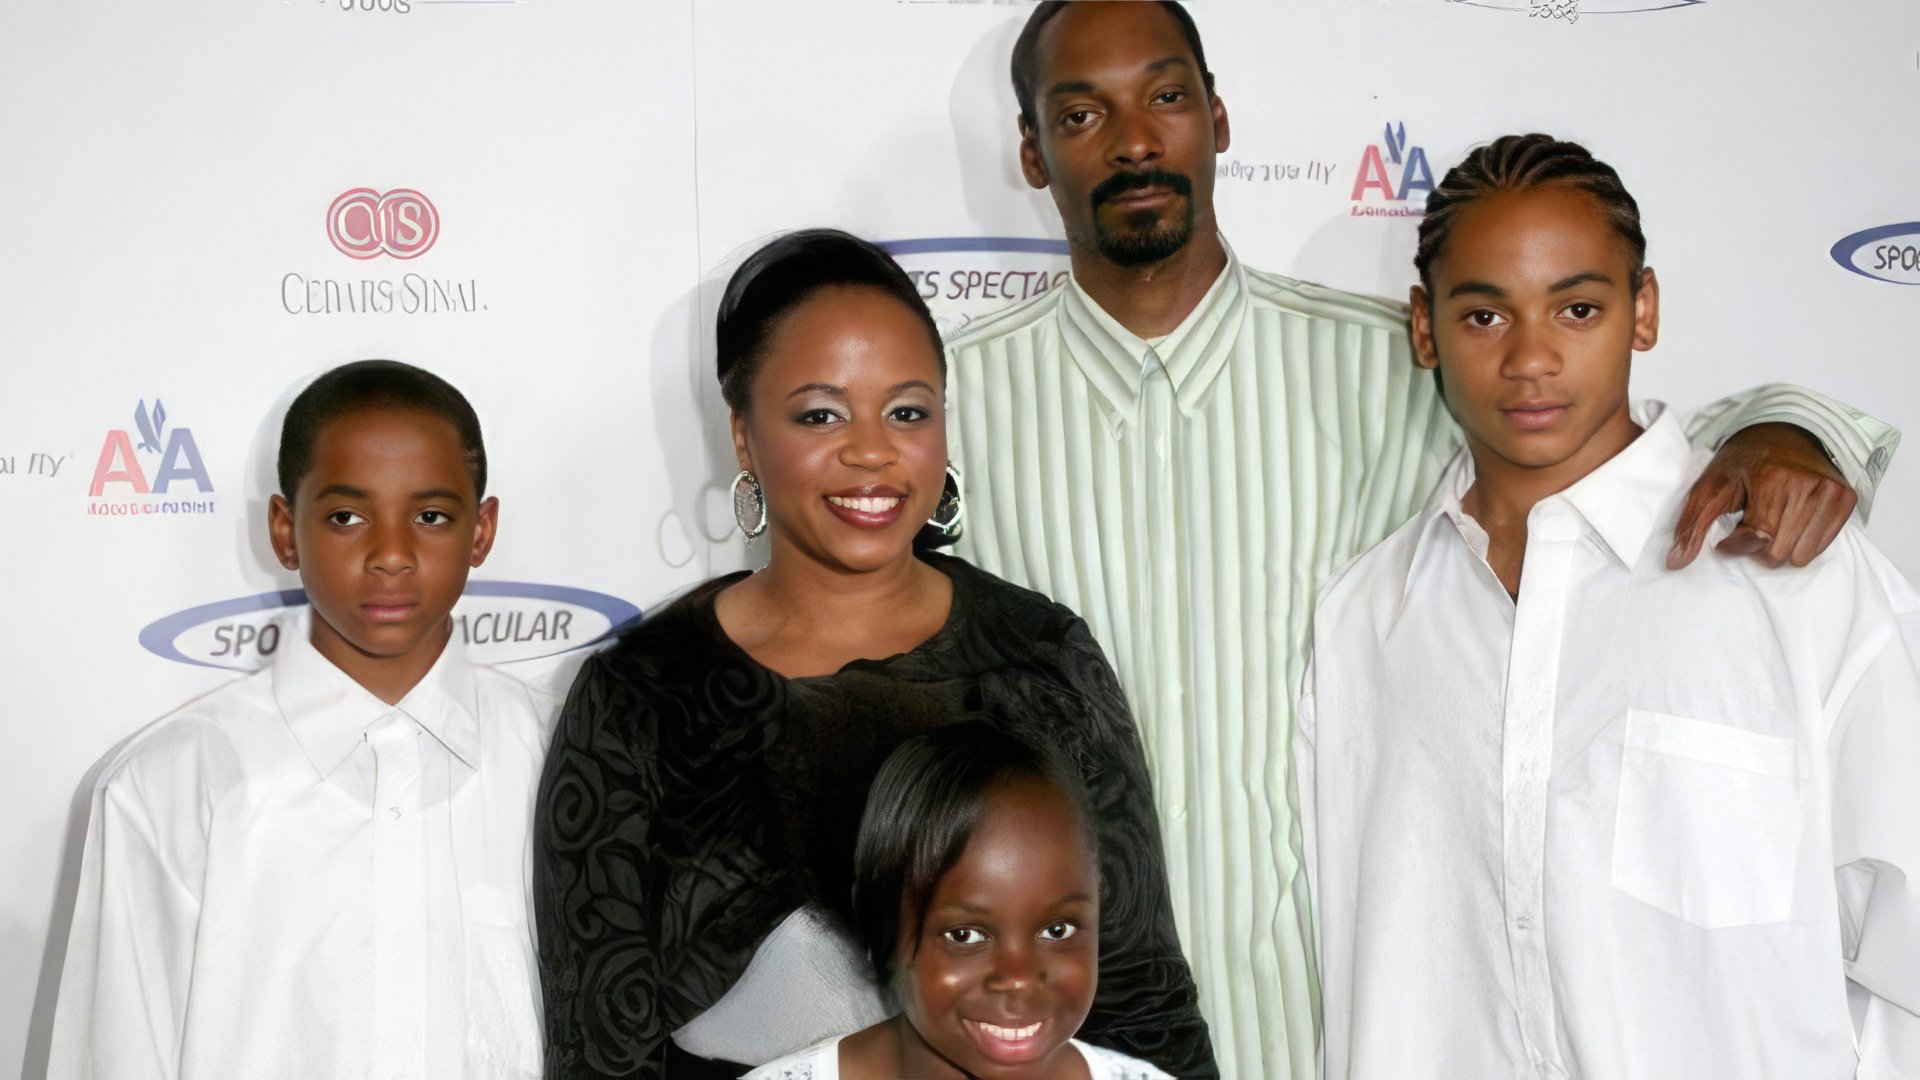 Snoop Dogg with his wife and children